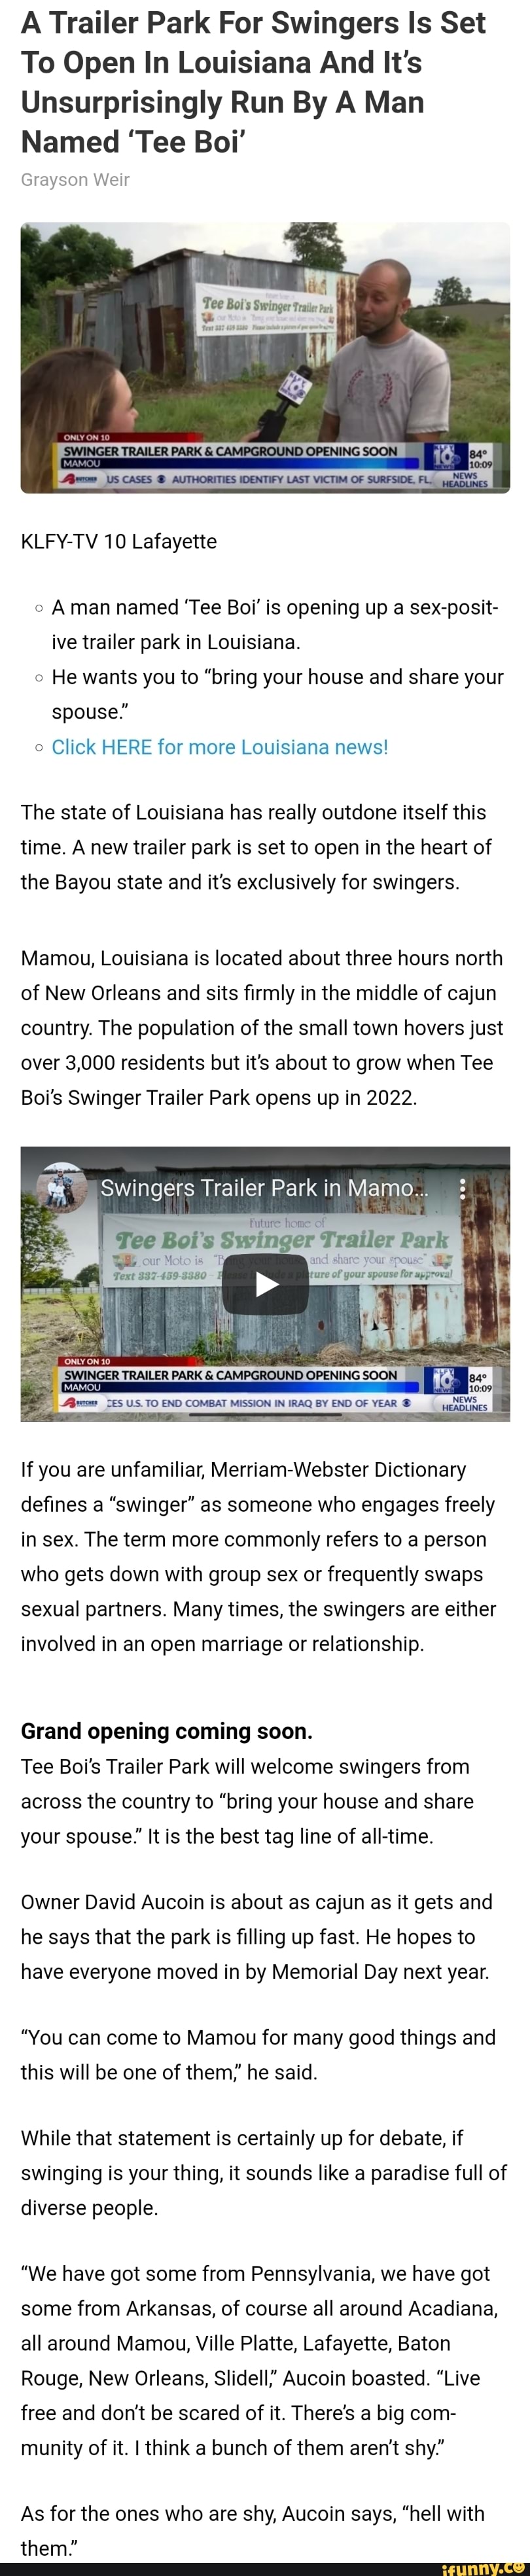 A Trailer Park For Swingers Is Set To Open In Louisiana And Its Unsurprisingly Run By picture